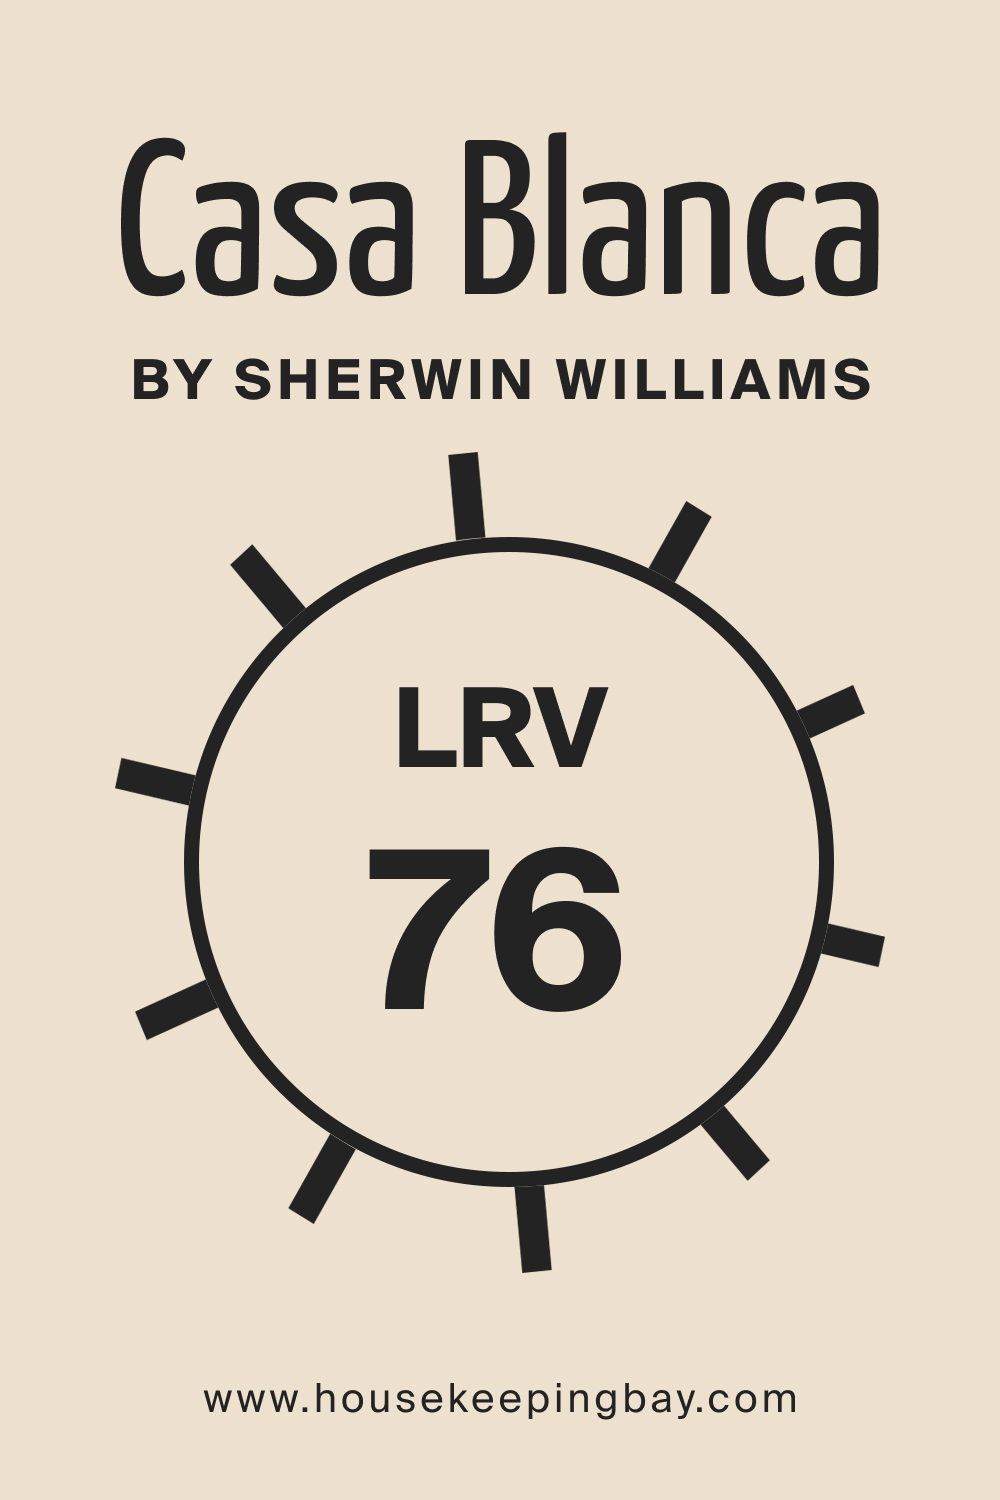 LRV Casa Blanca 7571 Paint Color by Sherwin Williams